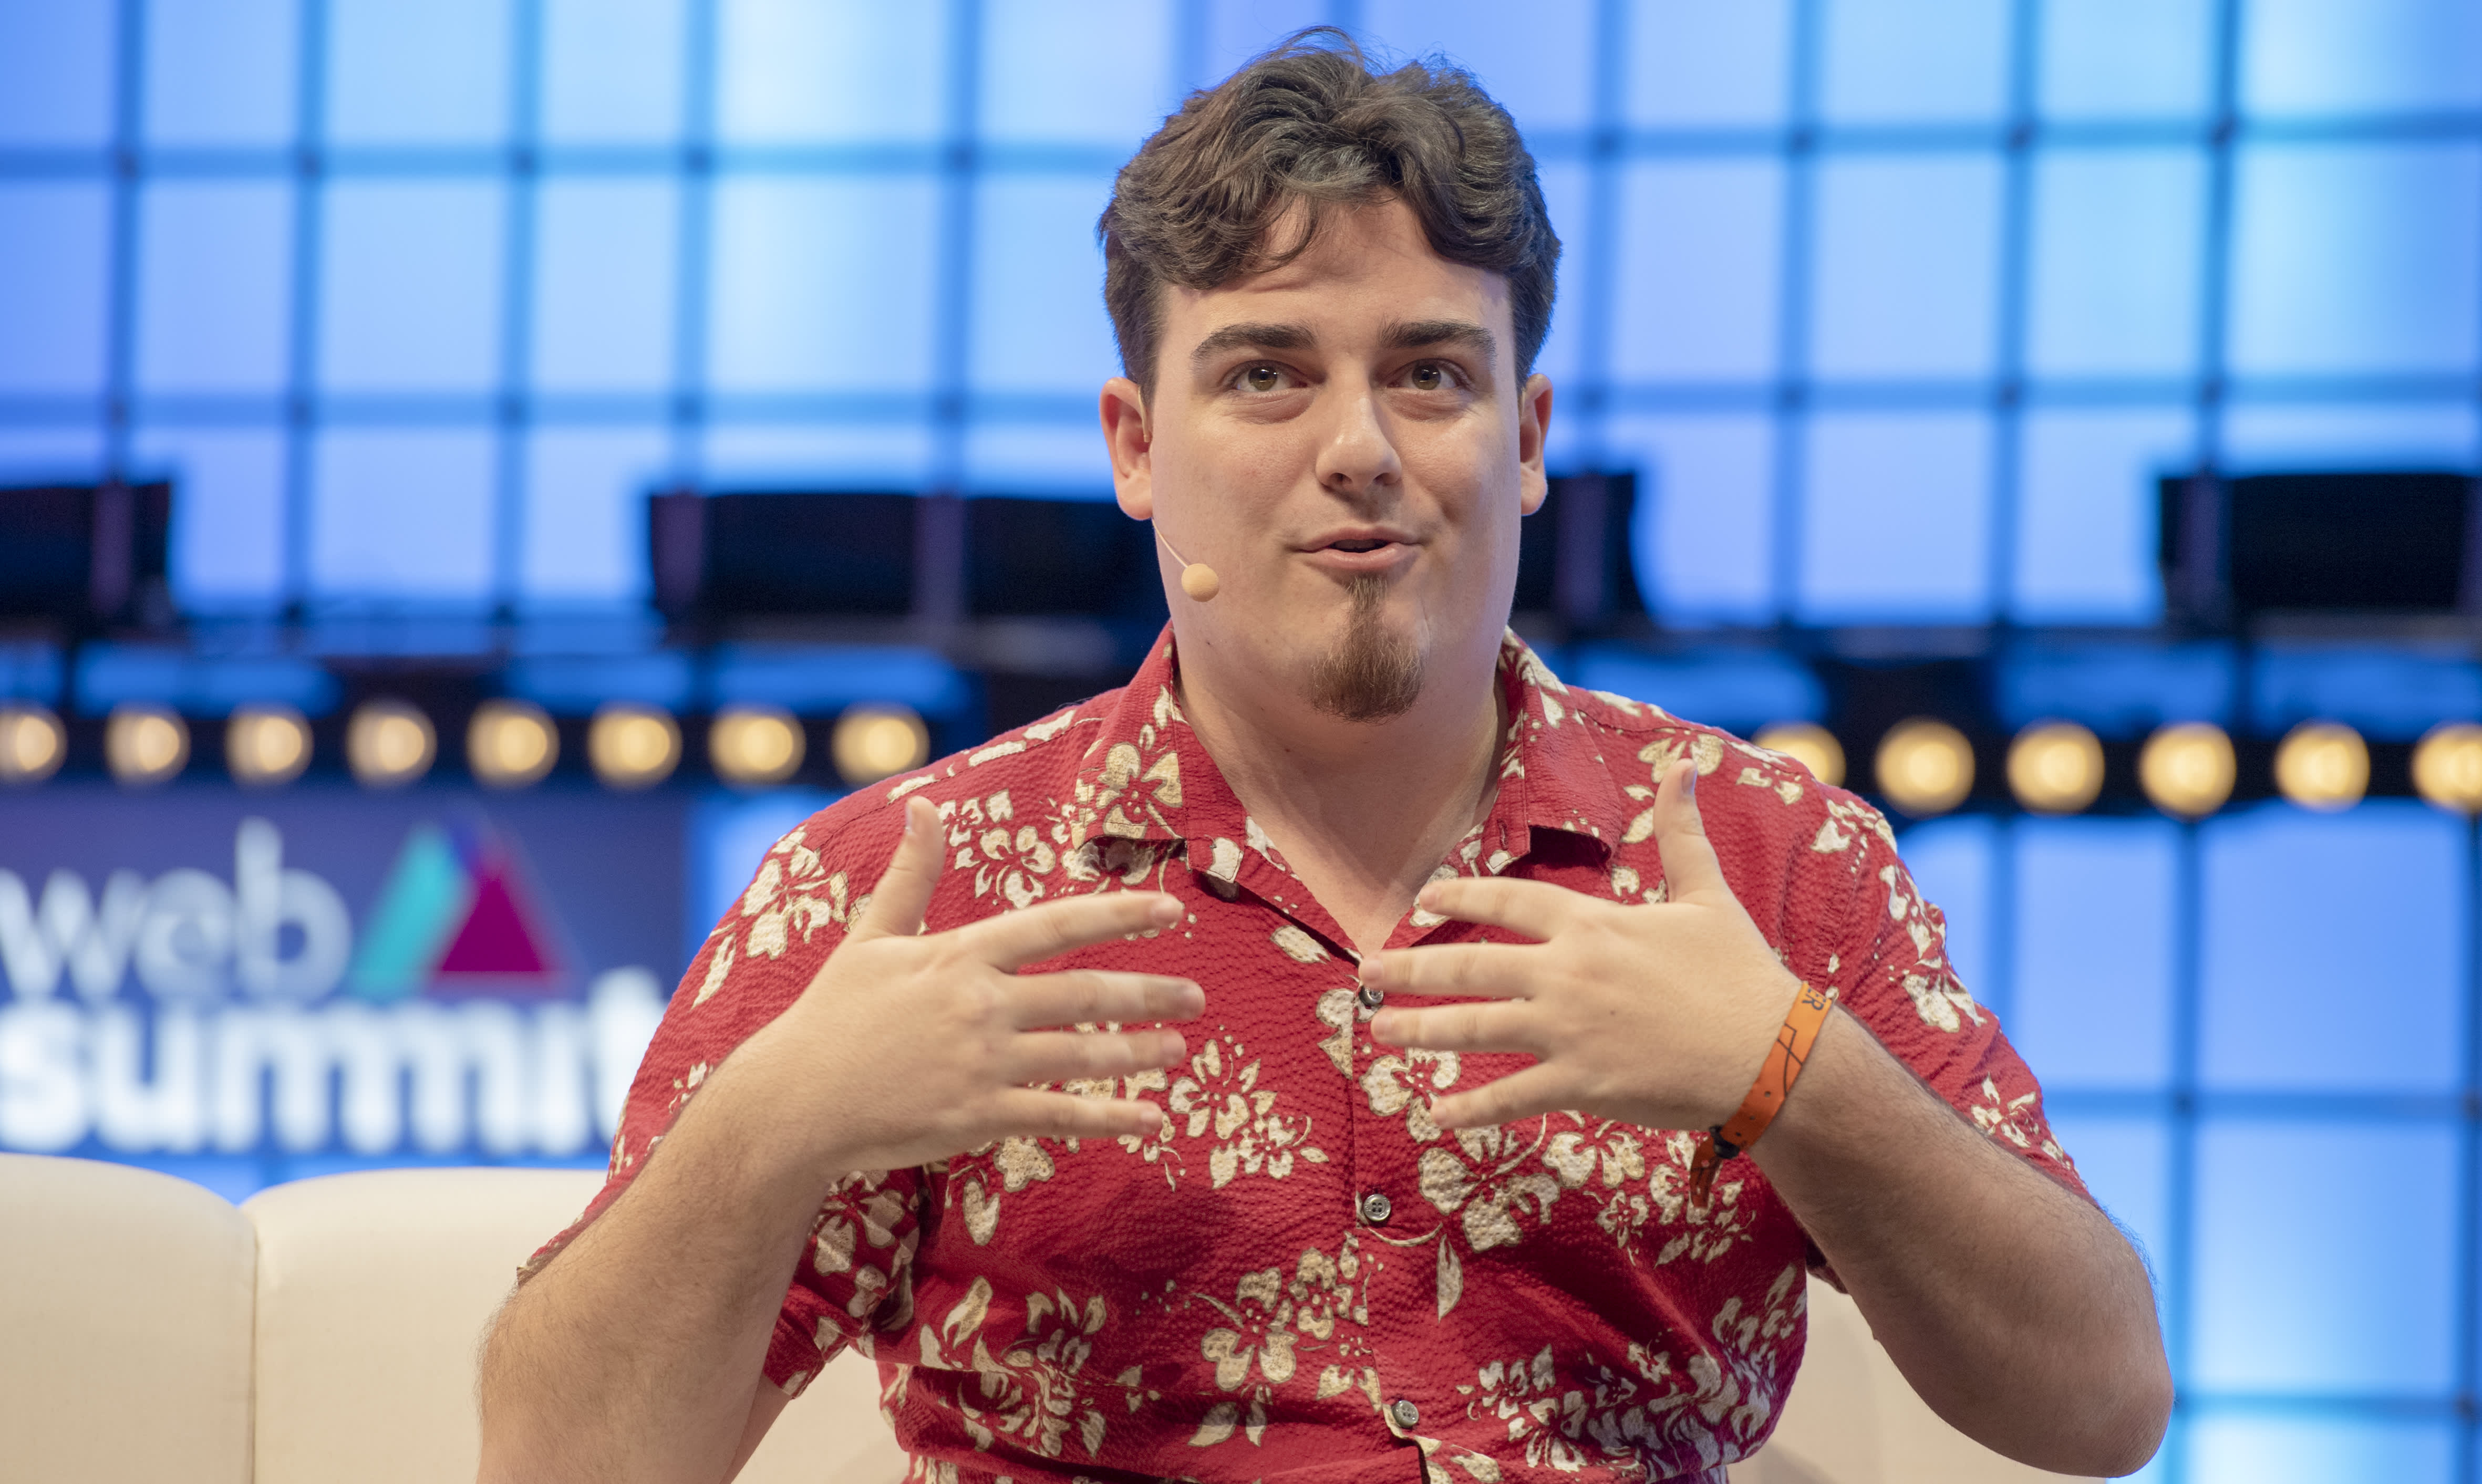 Anduril founder Palmer Luckey announced Thursday that his start-up has raised an additional $450 million in funding, which will be used to "turn 